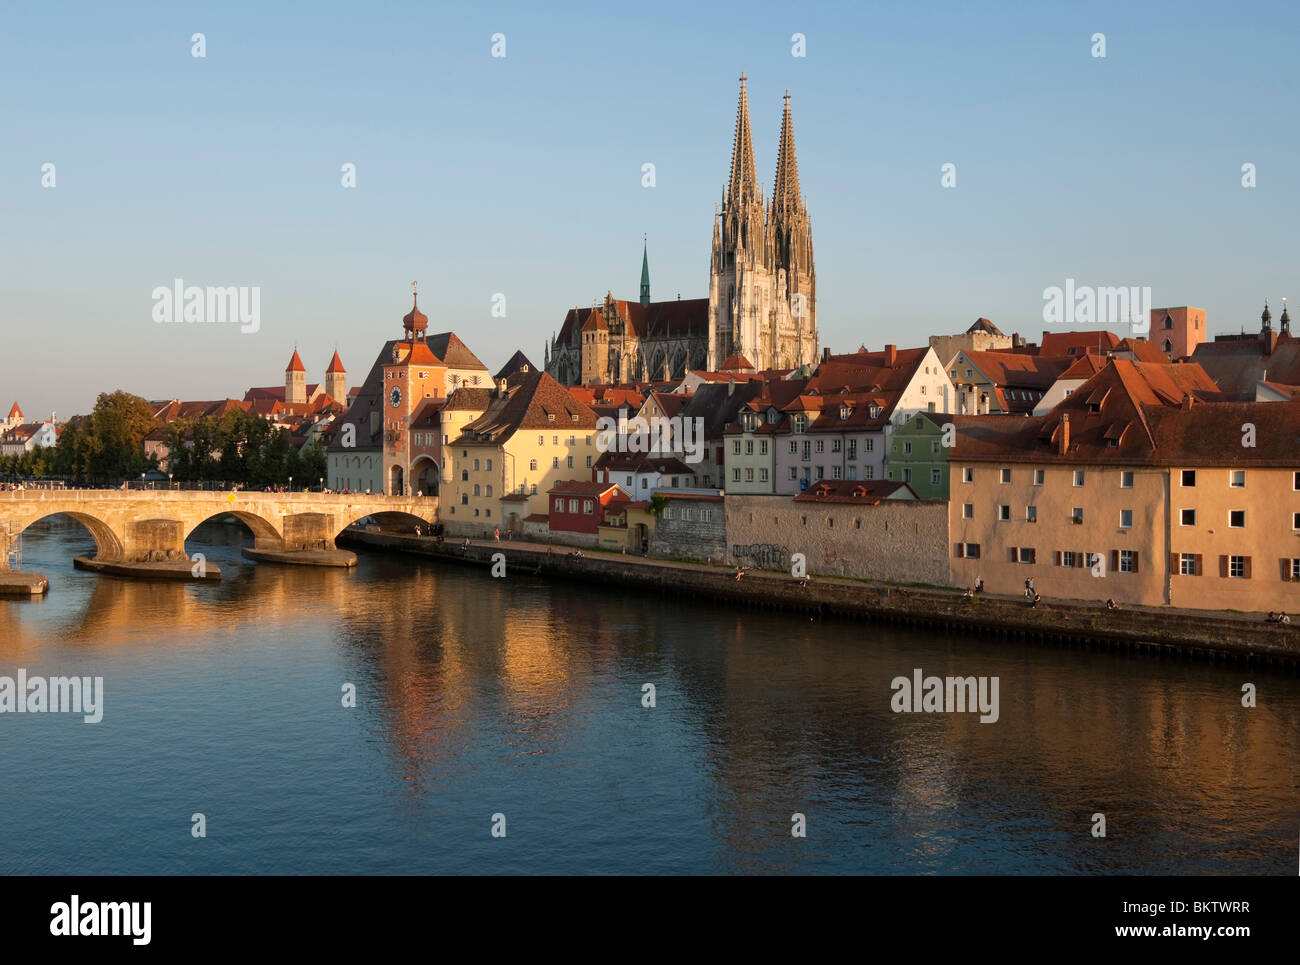 Regensburg at river Danube: Old Town with Stone Bridge, City Gate, Cathedral St. Peter, Upper Palatinate, Bavaria, Germany Stock Photo